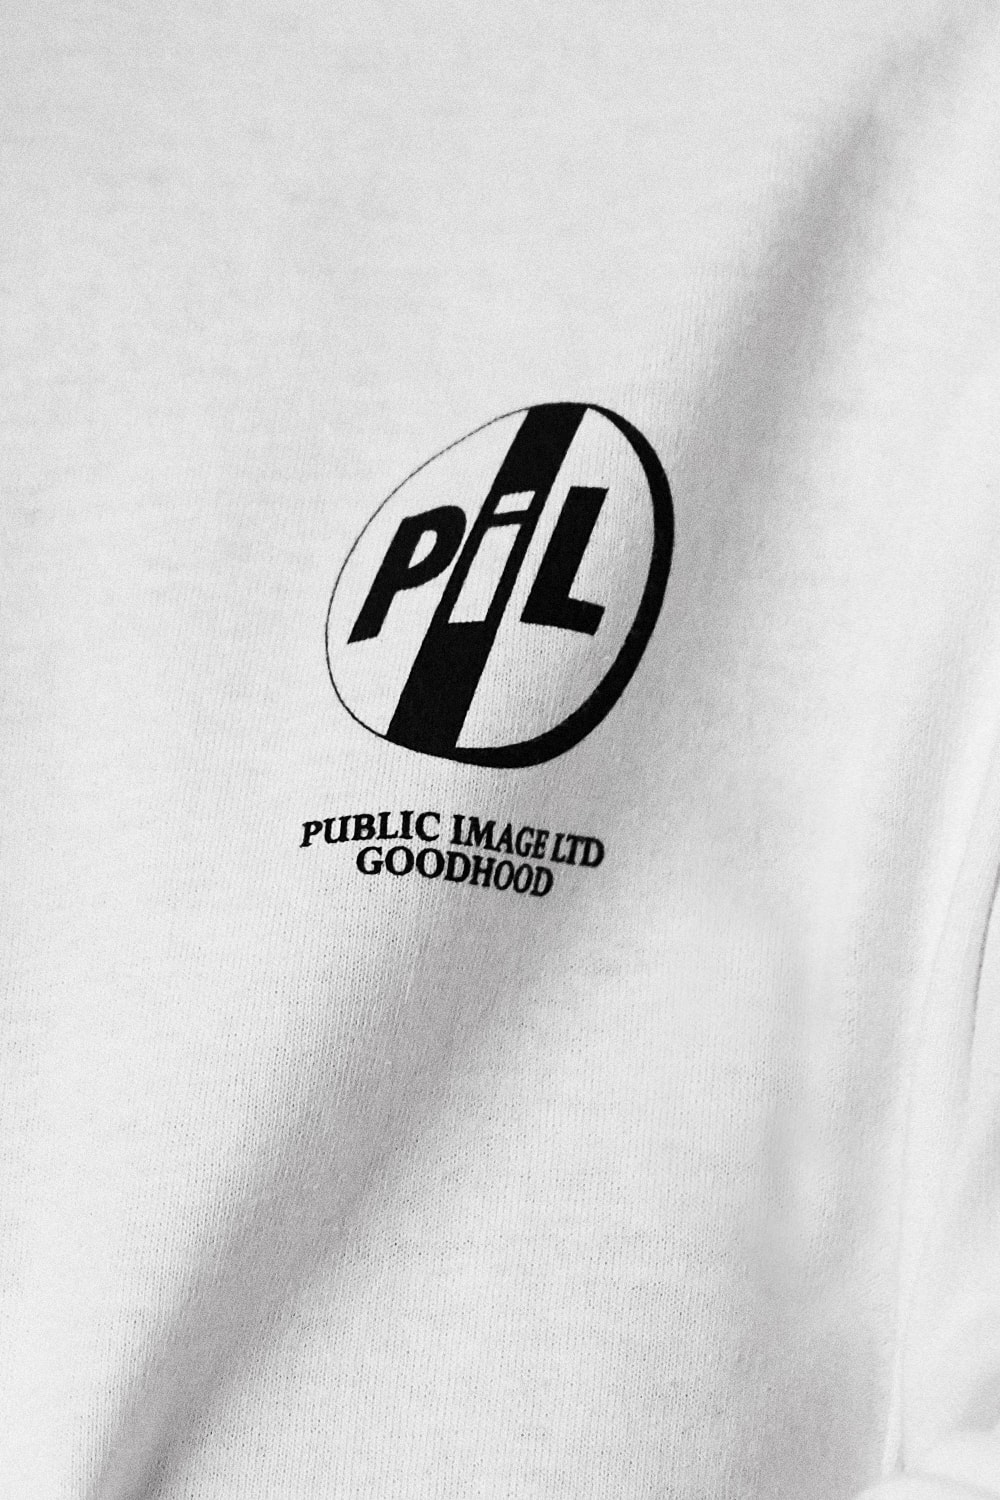 Goodhood x Bravado x Public Image Collaboration Products Release Details Coming Soon Merchandise Band Tour Documentary Public Image is Rotten